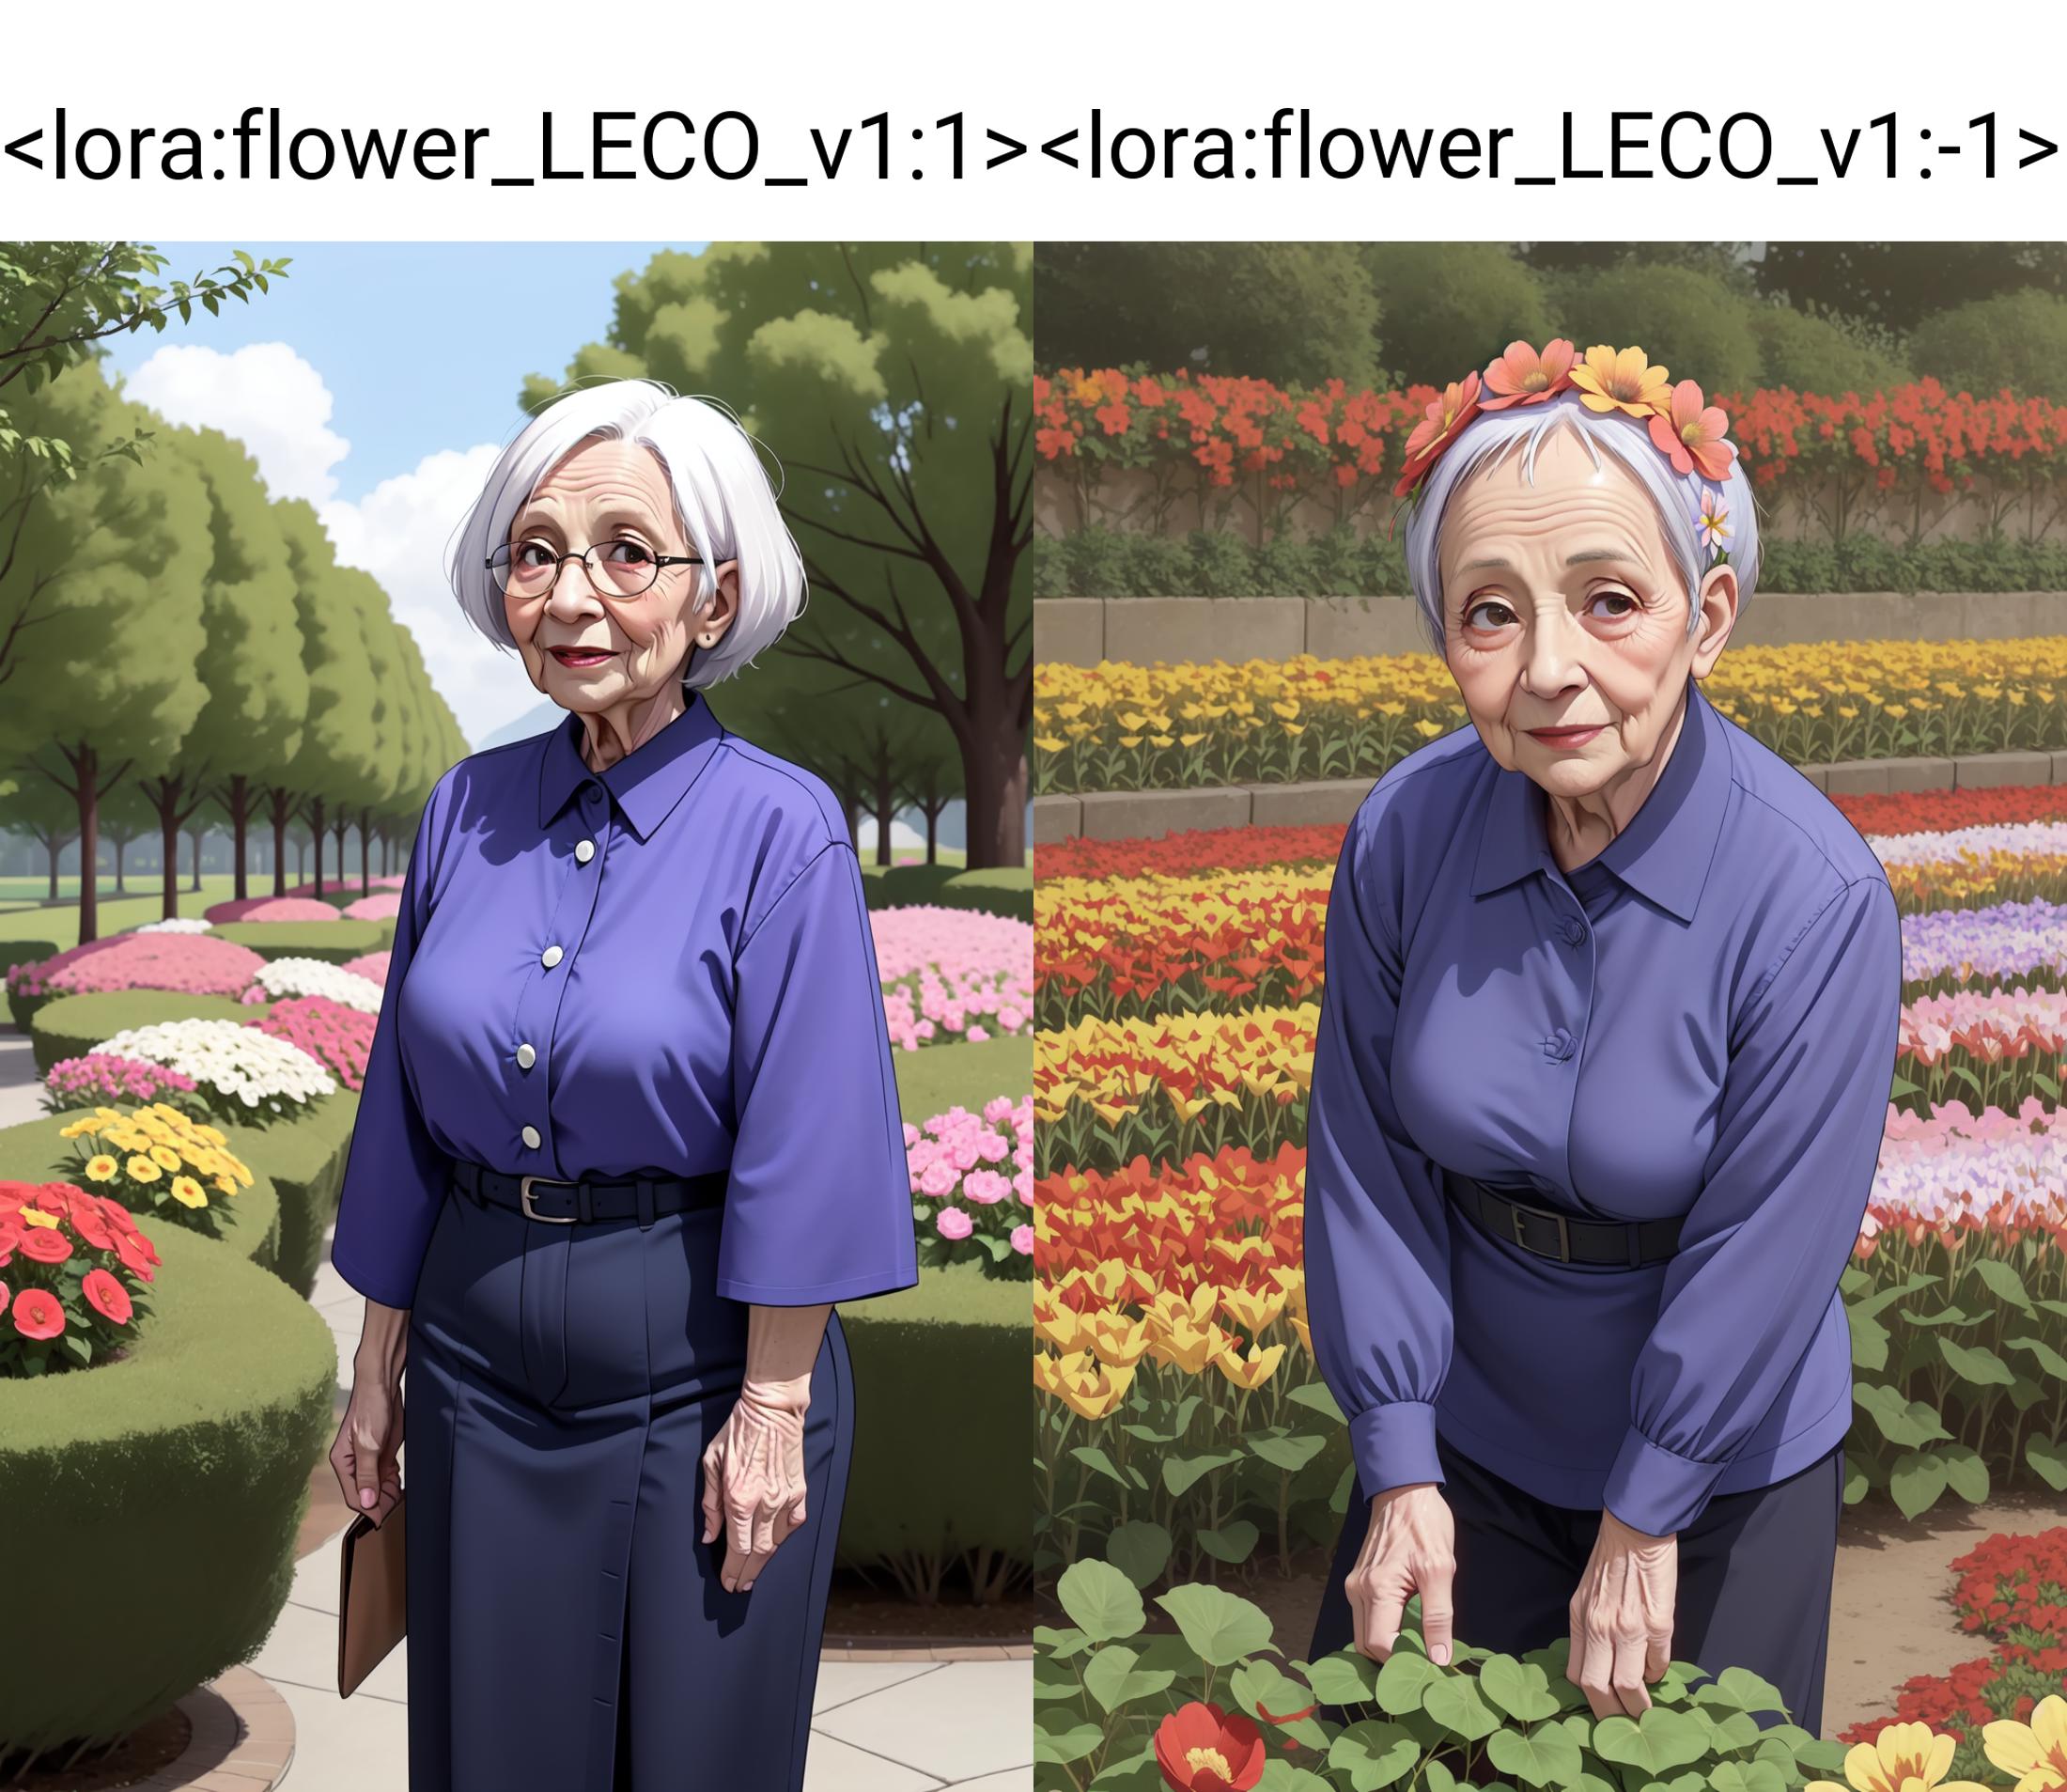 reduce flower bloom-LECO image by Liquidn2